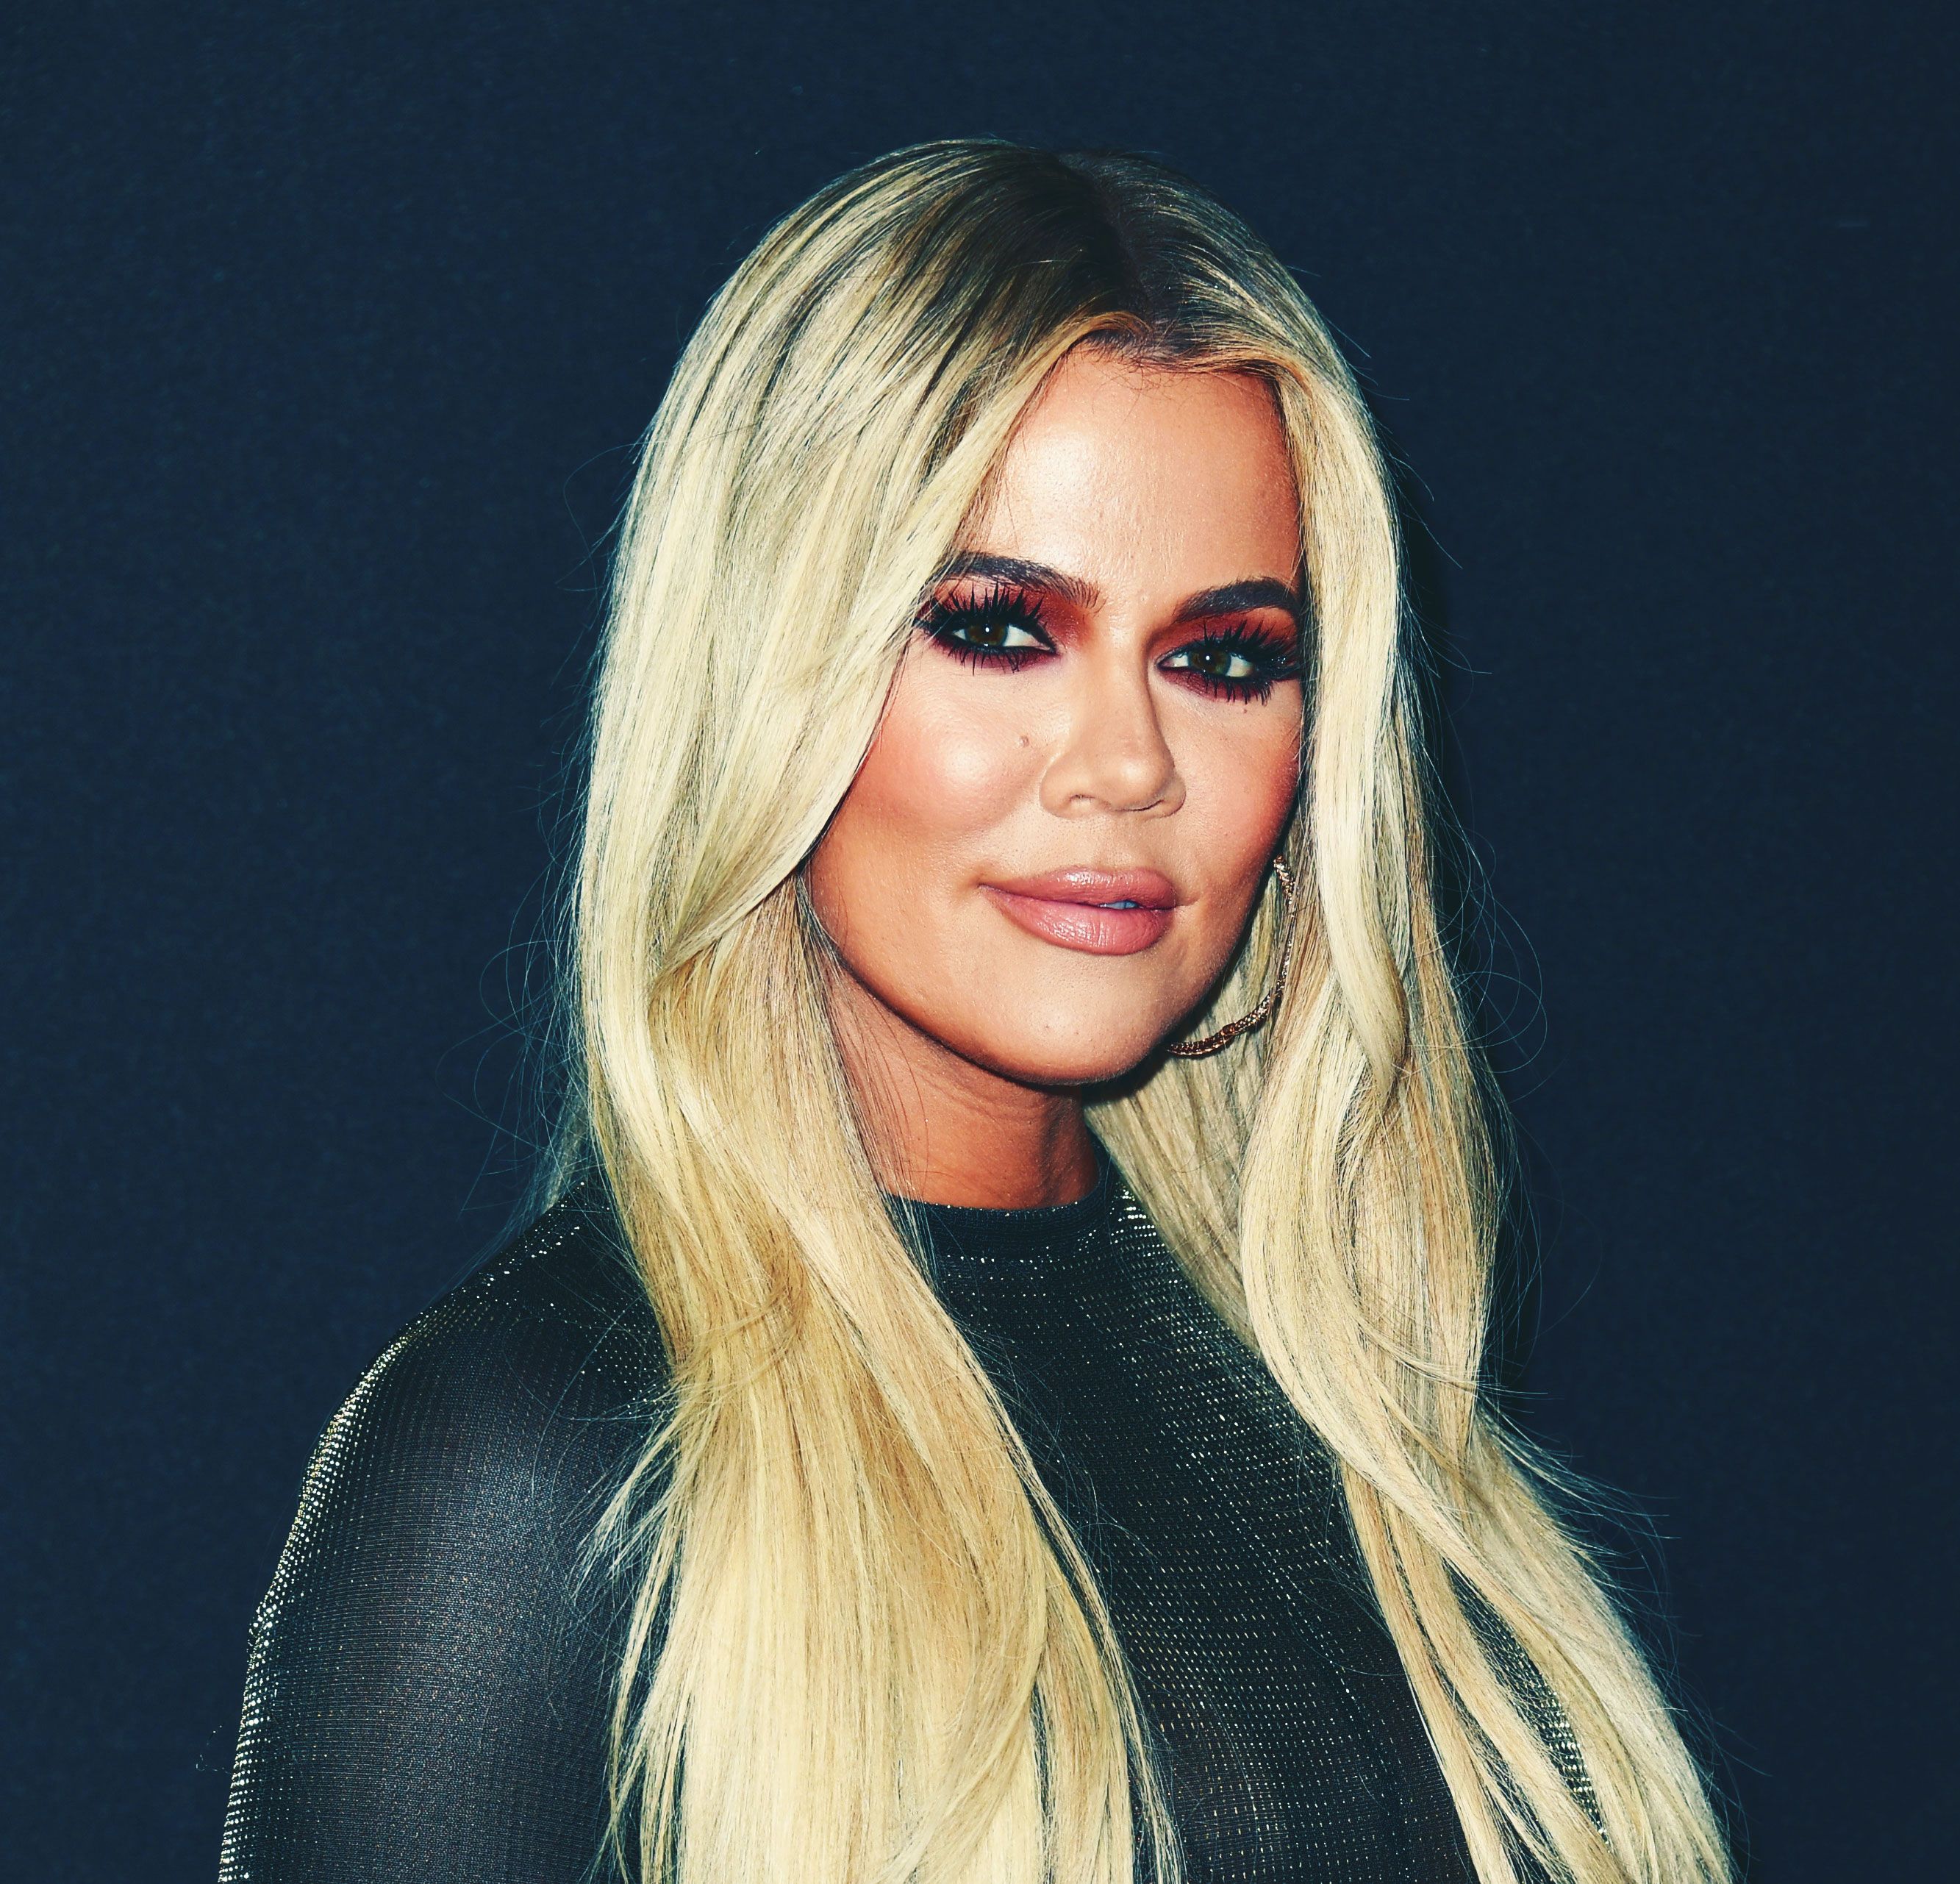 Khloe Kardashian's Latest Outfit for True Thompson Is So Fetch